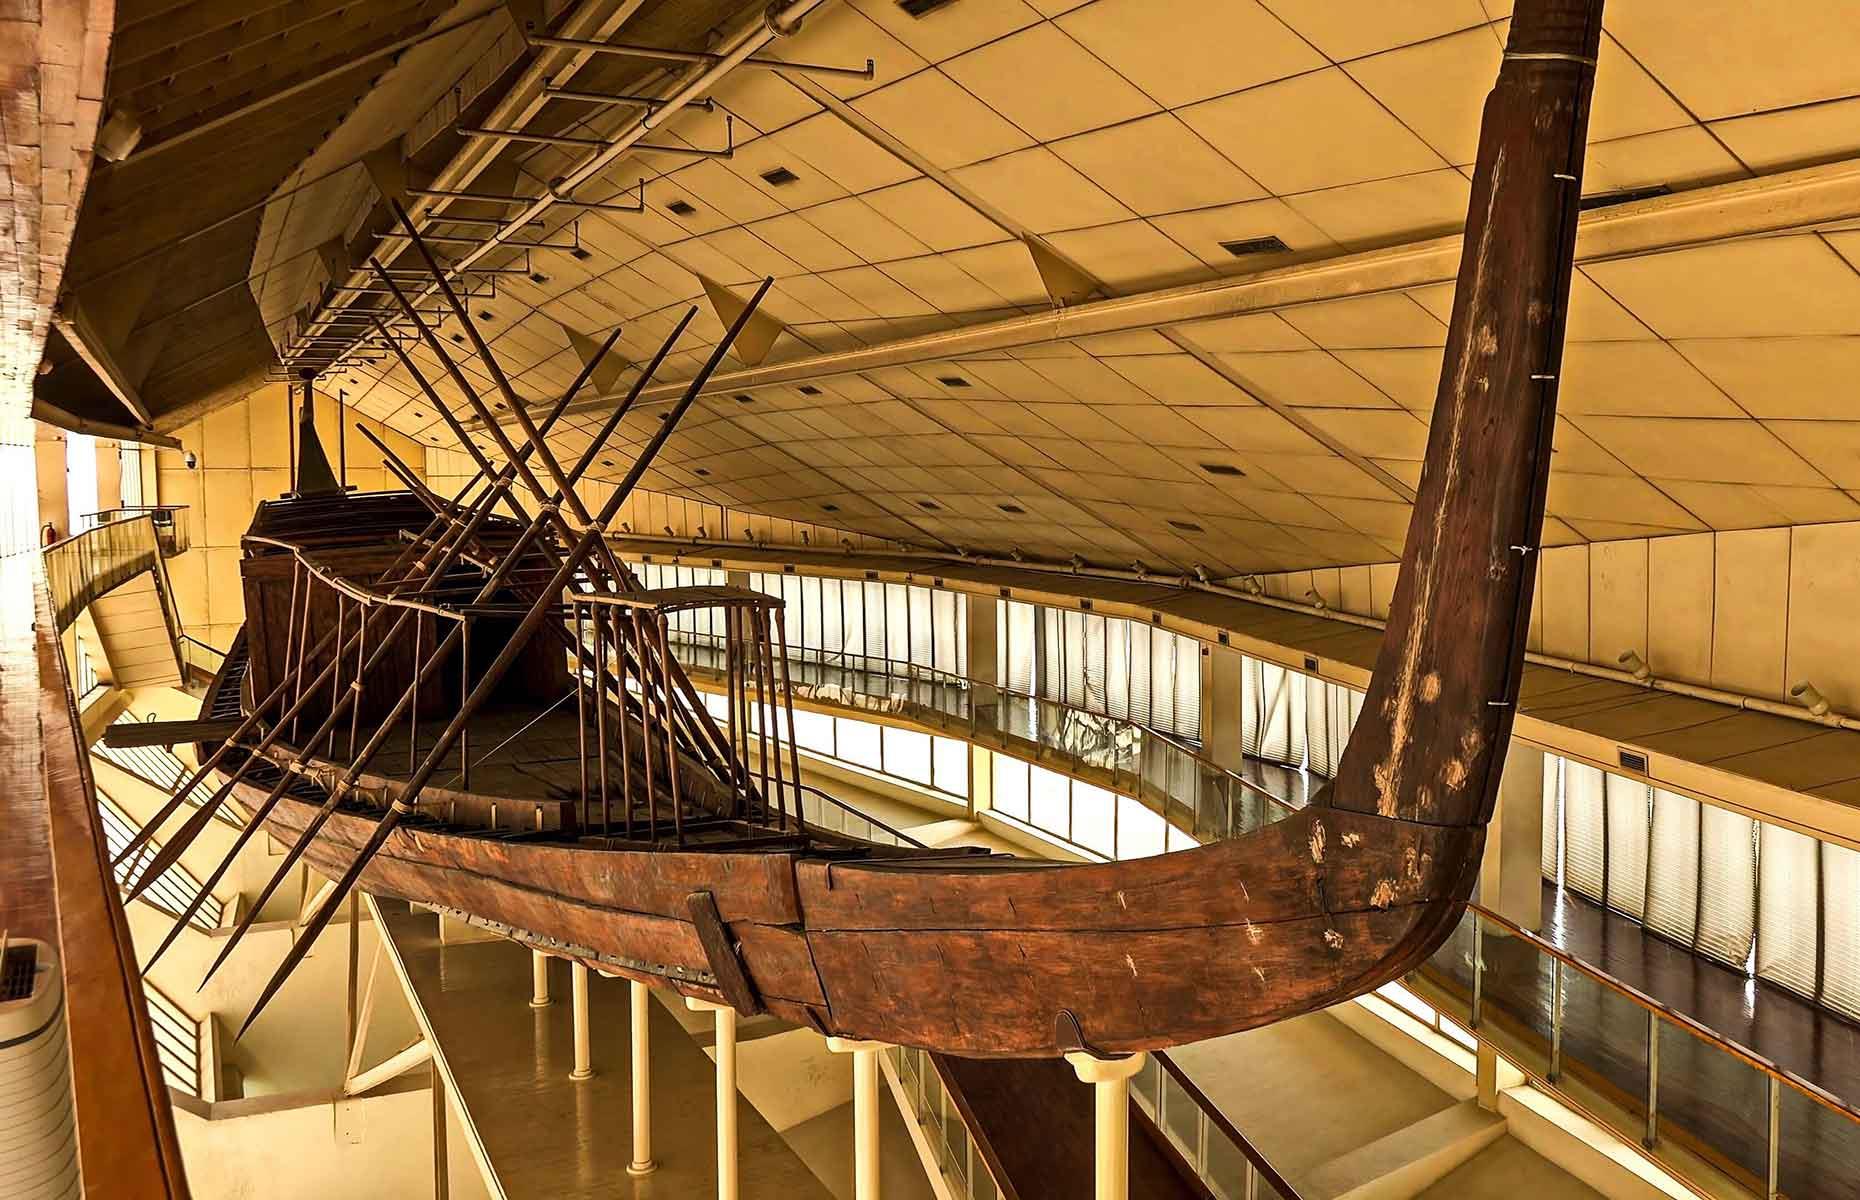 <p>In 1954, a dismantled wooden ship was discovered buried next to the pyramid – a common inclusion as ancient Egyptians believed these vessels would transport their kings to the afterlife. As the pharaoh was believed to be the earthly representation of Ra, the sun god, they were called solar boats. Until 2021, Khufu's ship was housed in its very own Solar Boat Museum, not far from where it was first discovered, but it has now been moved to the new Grand Egyptian Museum, set to open to the public in early 2023.</p>  <p><a href="http://bit.ly/3roL4wv"><strong>Love this? Follow our Facebook page for more features on ancient discoveries and travel inspiration</strong></a></p>